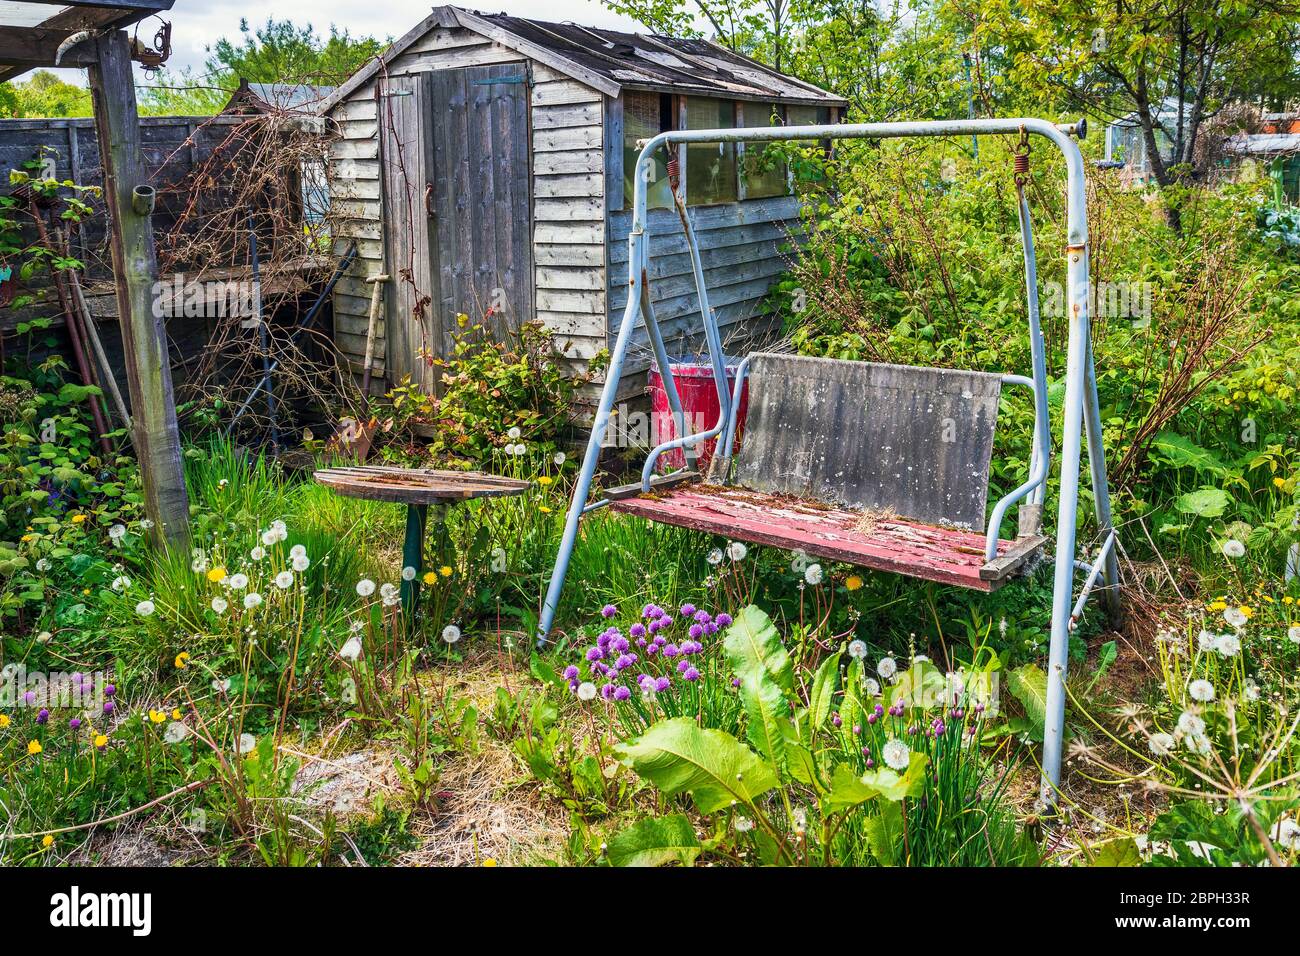 Overgrown allotment with discarded garden swing and wooden shed, Kilwinning, Ayrshire, Scotland Stock Photo